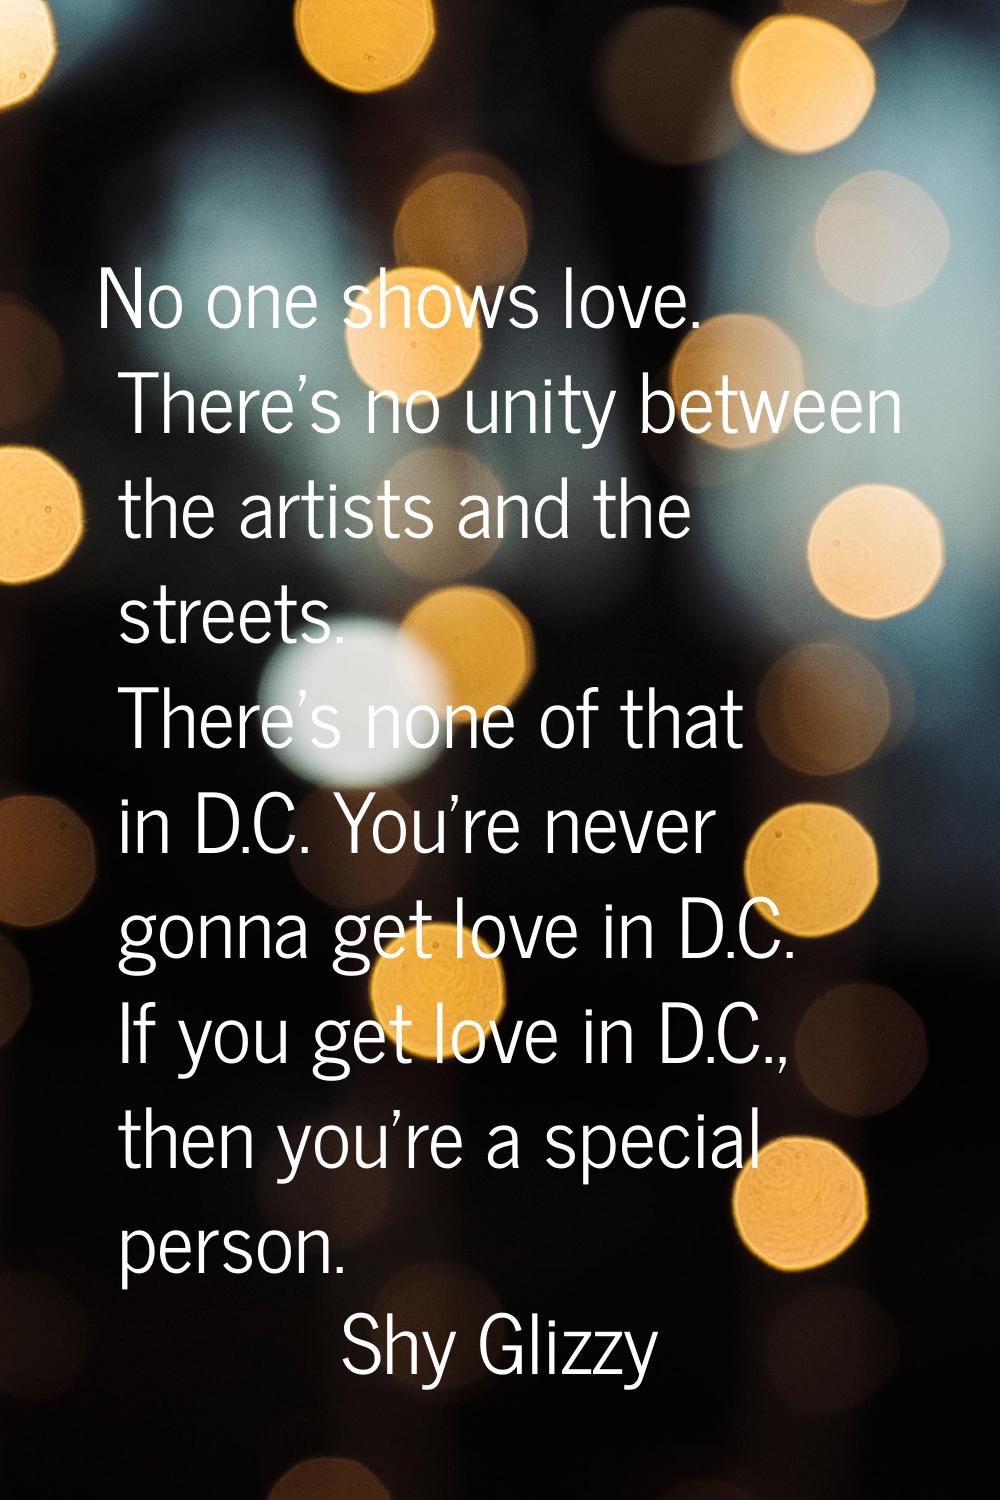 No one shows love. There's no unity between the artists and the streets. There's none of that in D.